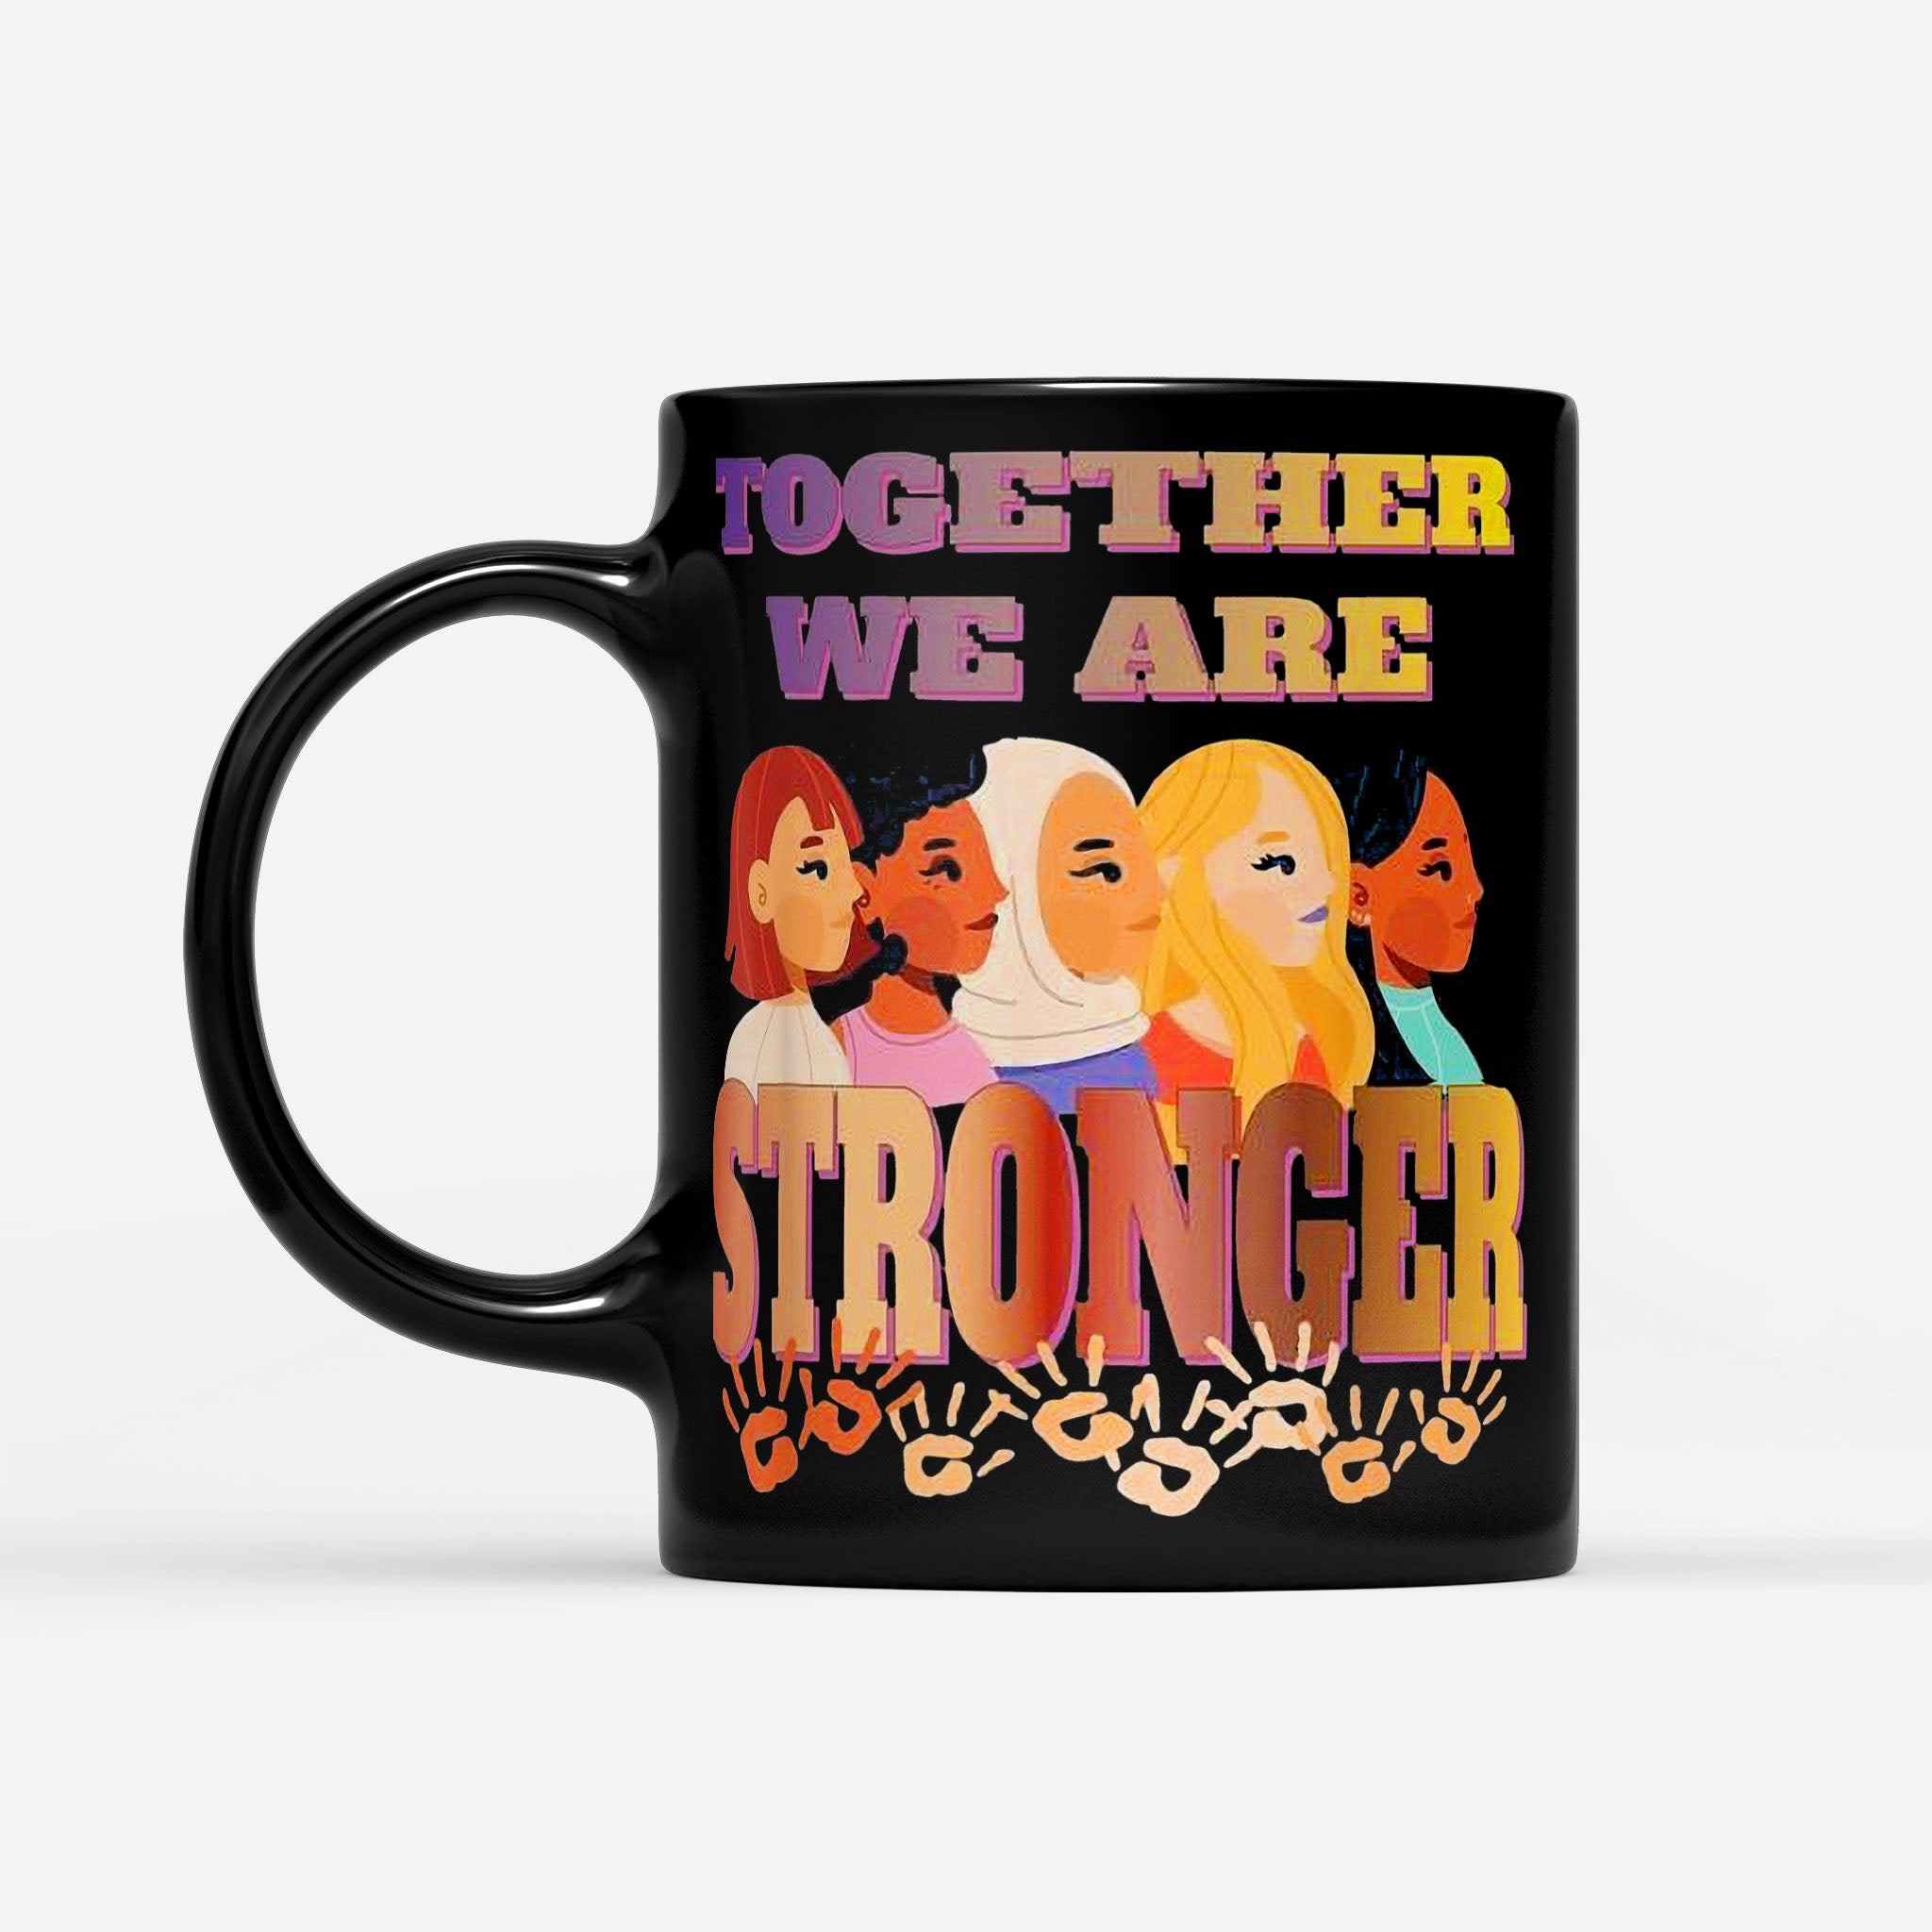 Together We Are Stronger Empowering Everywhere - Black Mug